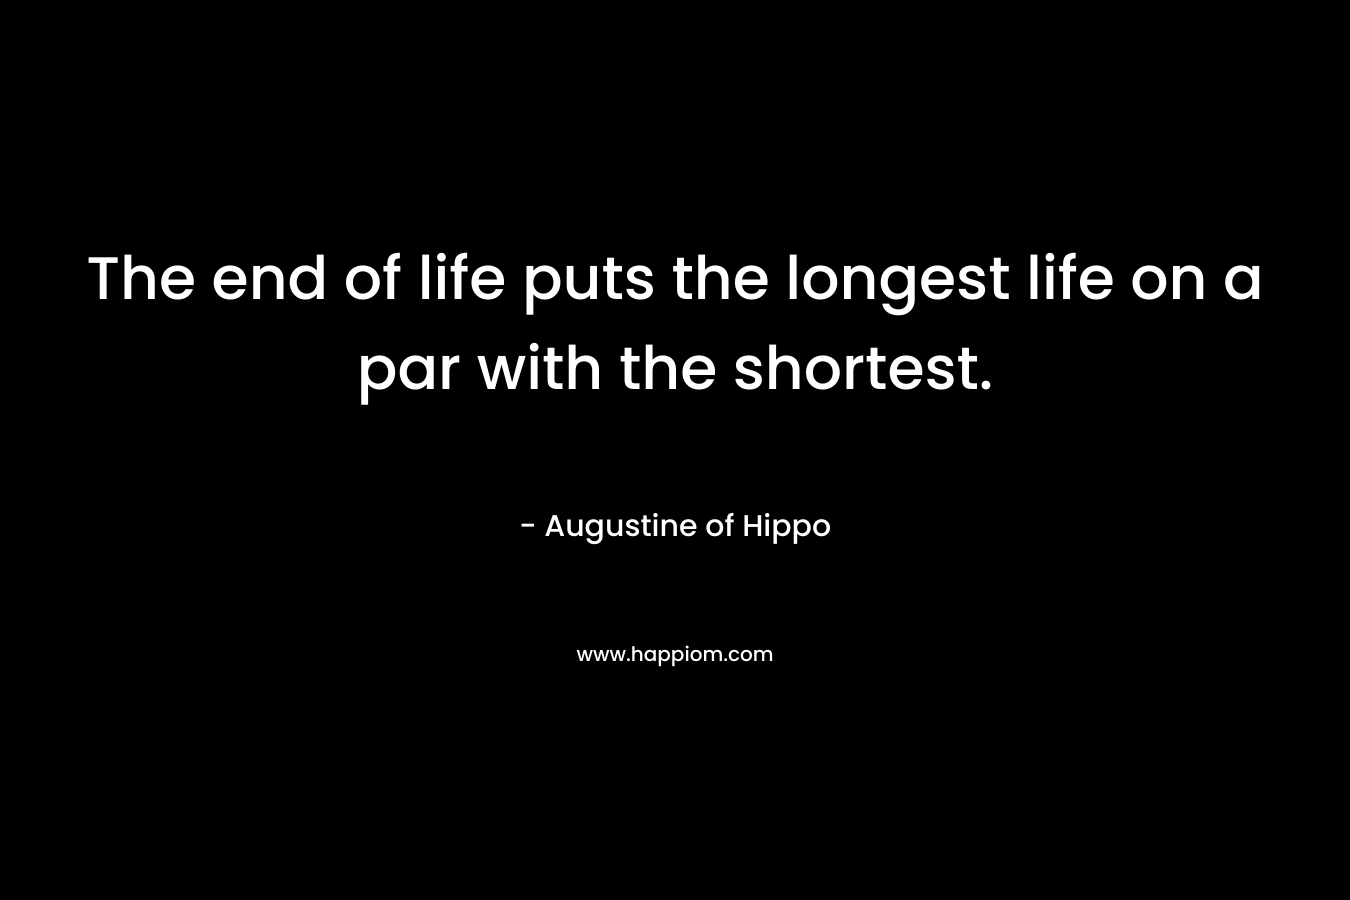 The end of life puts the longest life on a par with the shortest. – Augustine of Hippo